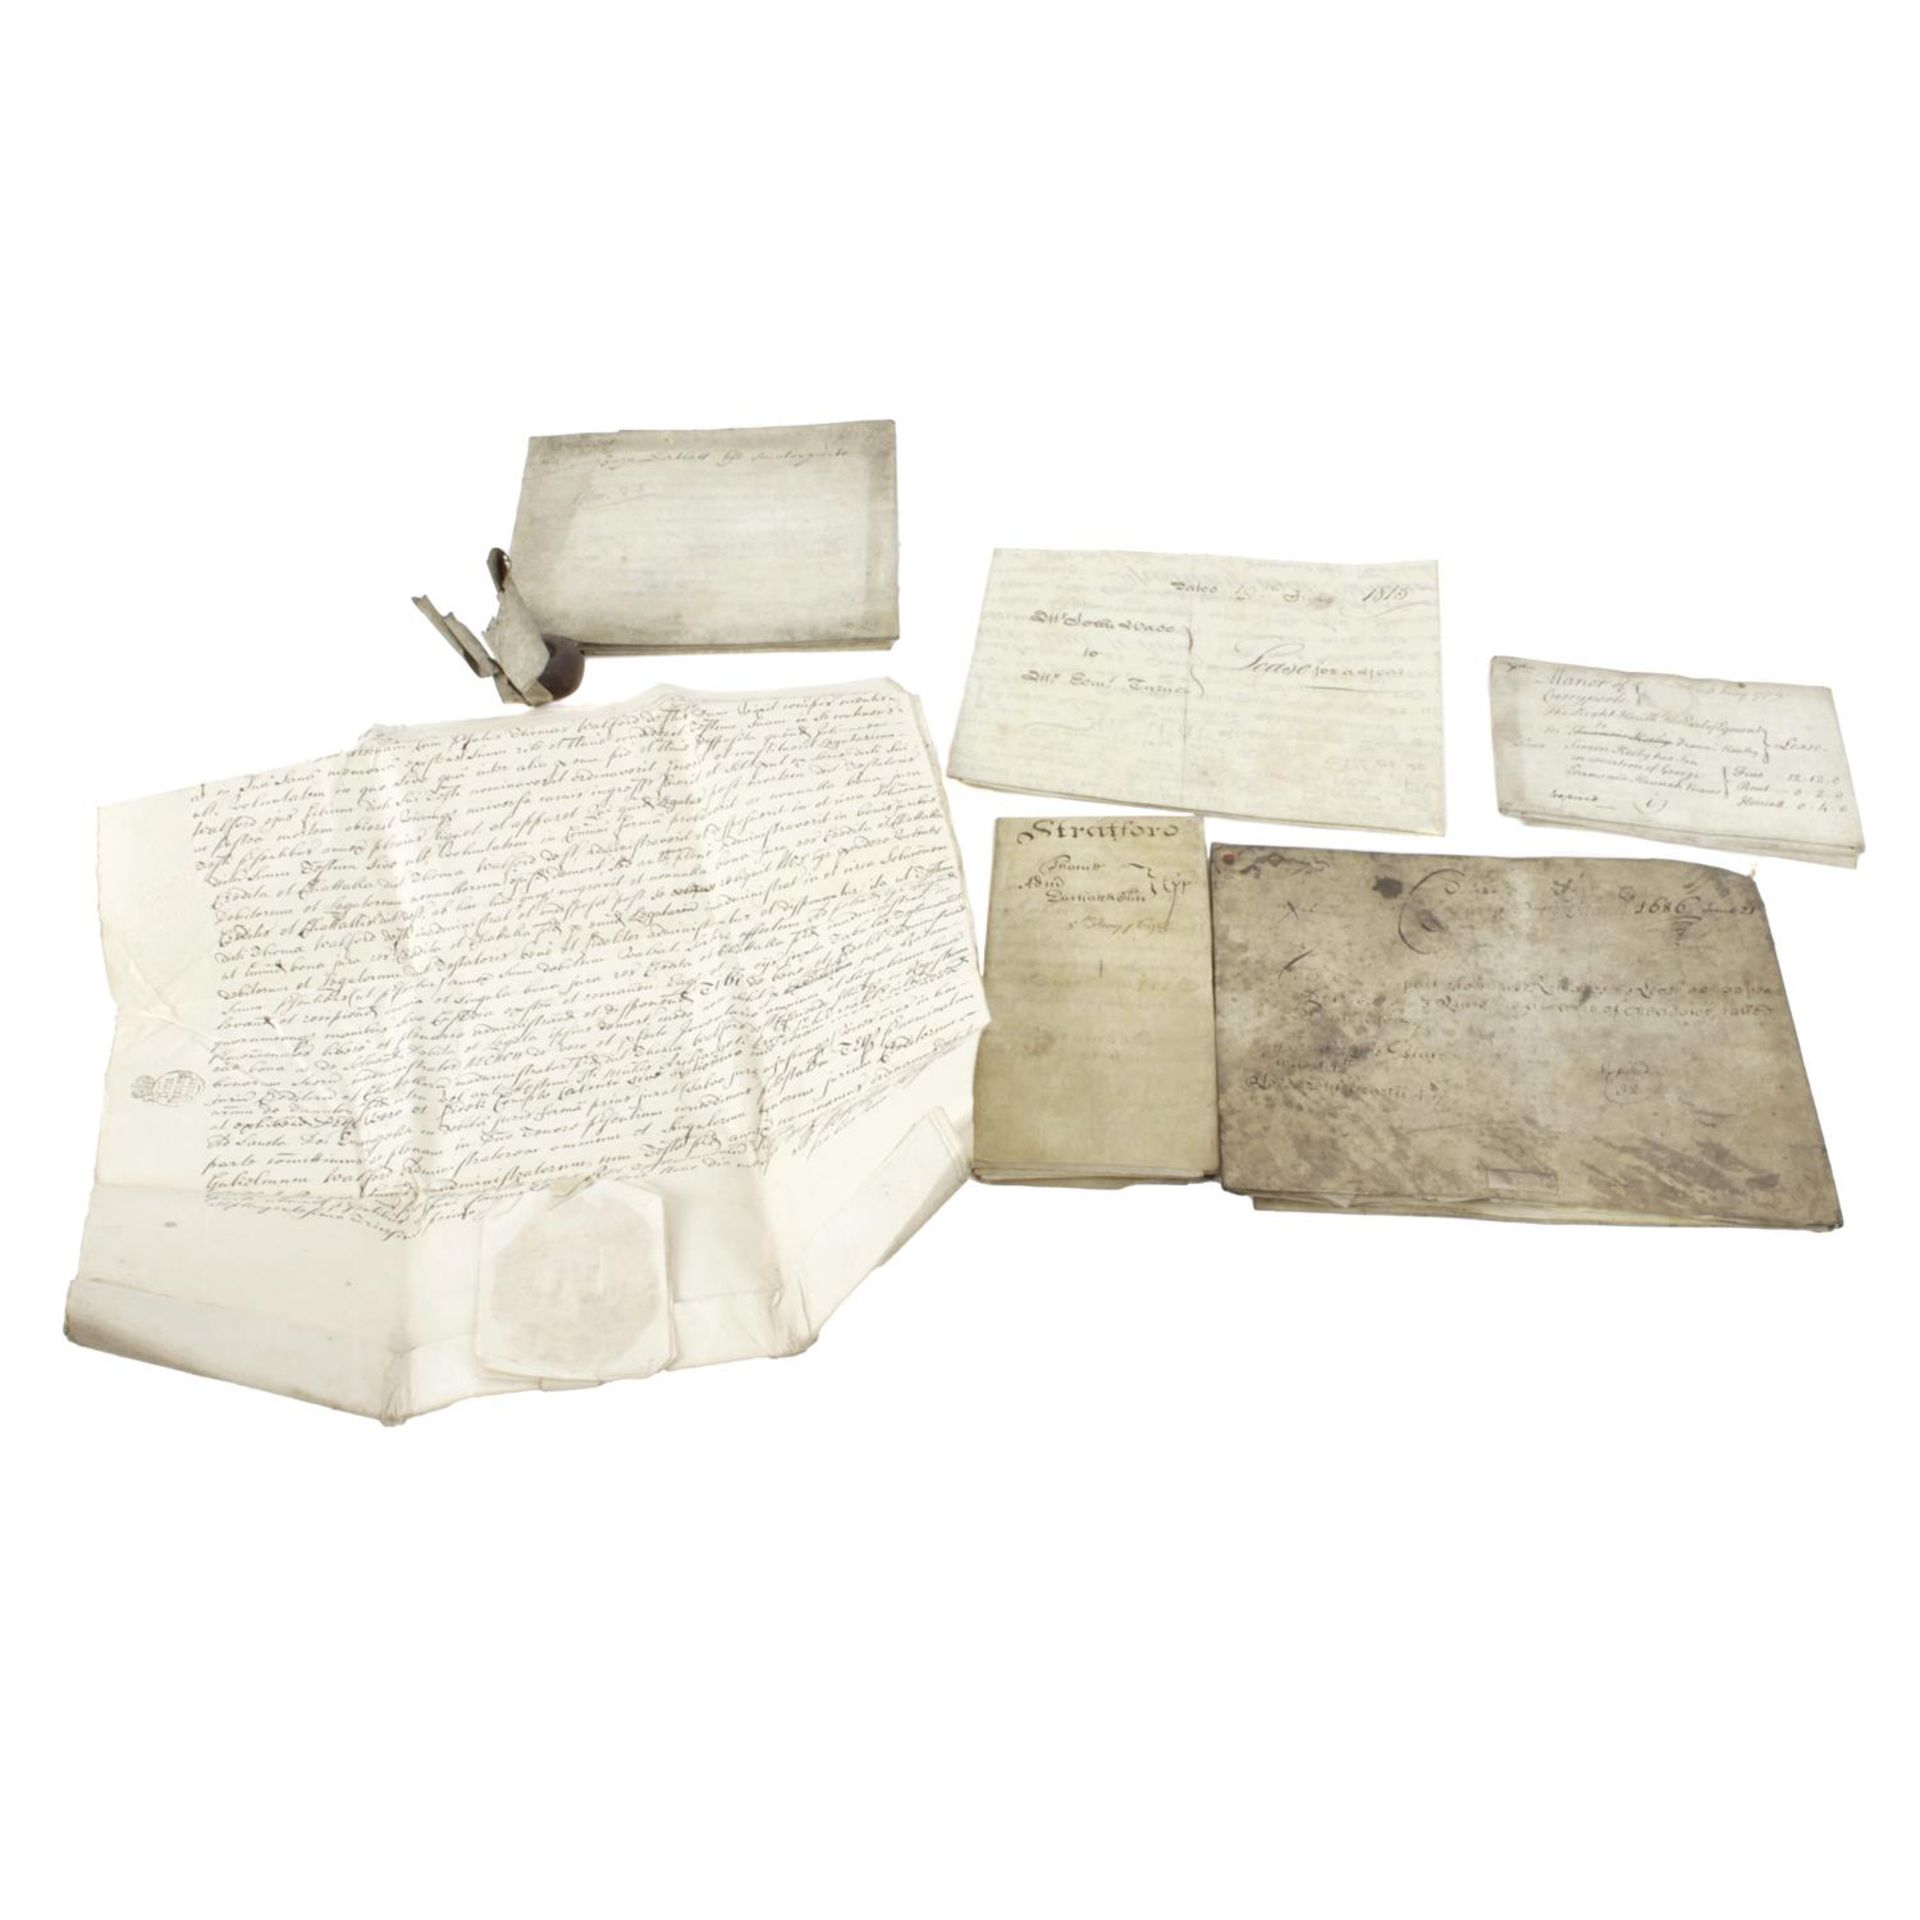 Assorted 17th to 19th century indentures